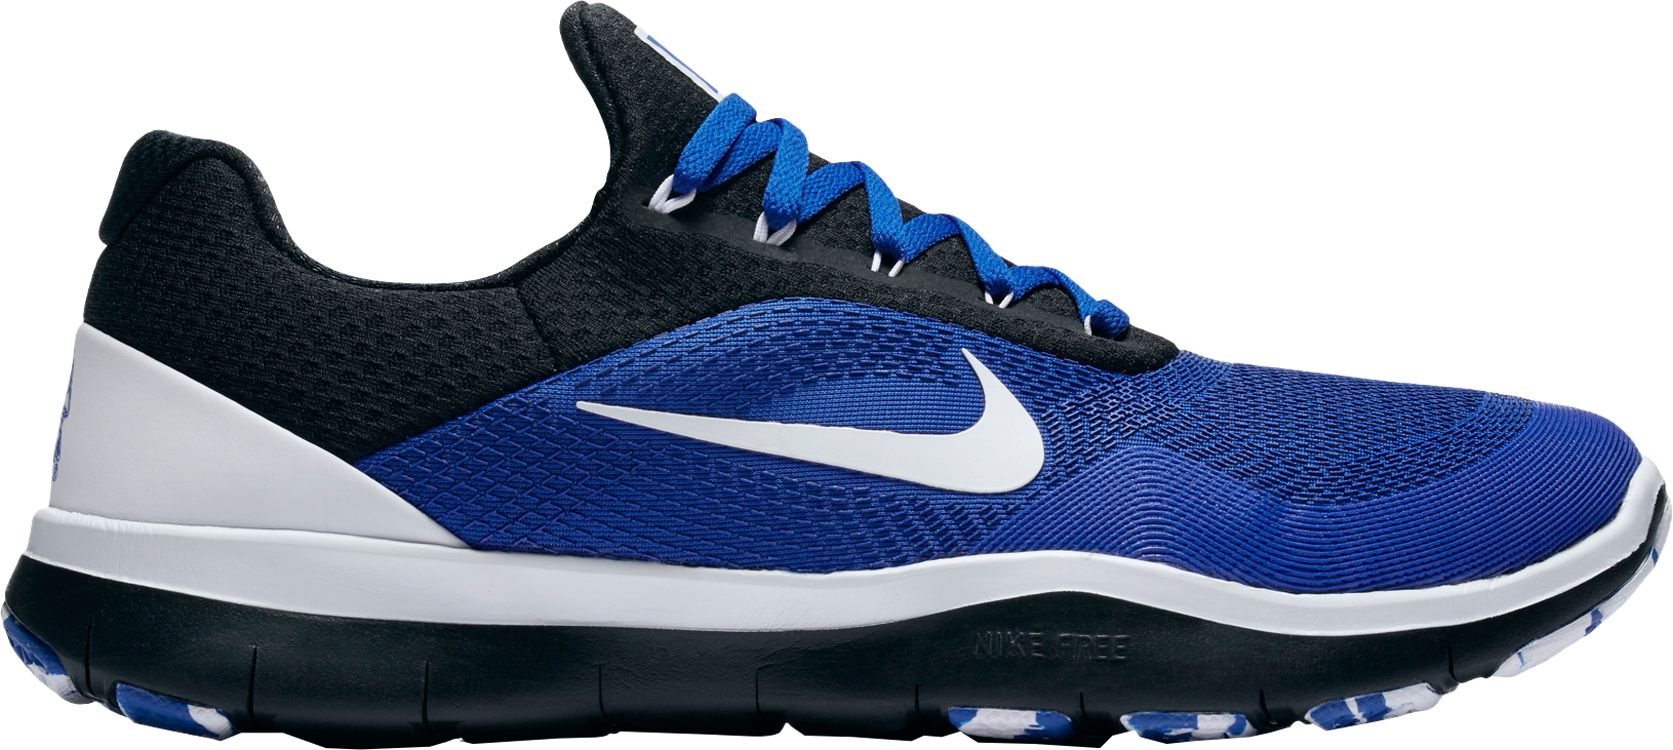 Cross Training Shoes by Nike & More | DICK'S Sporting Goods